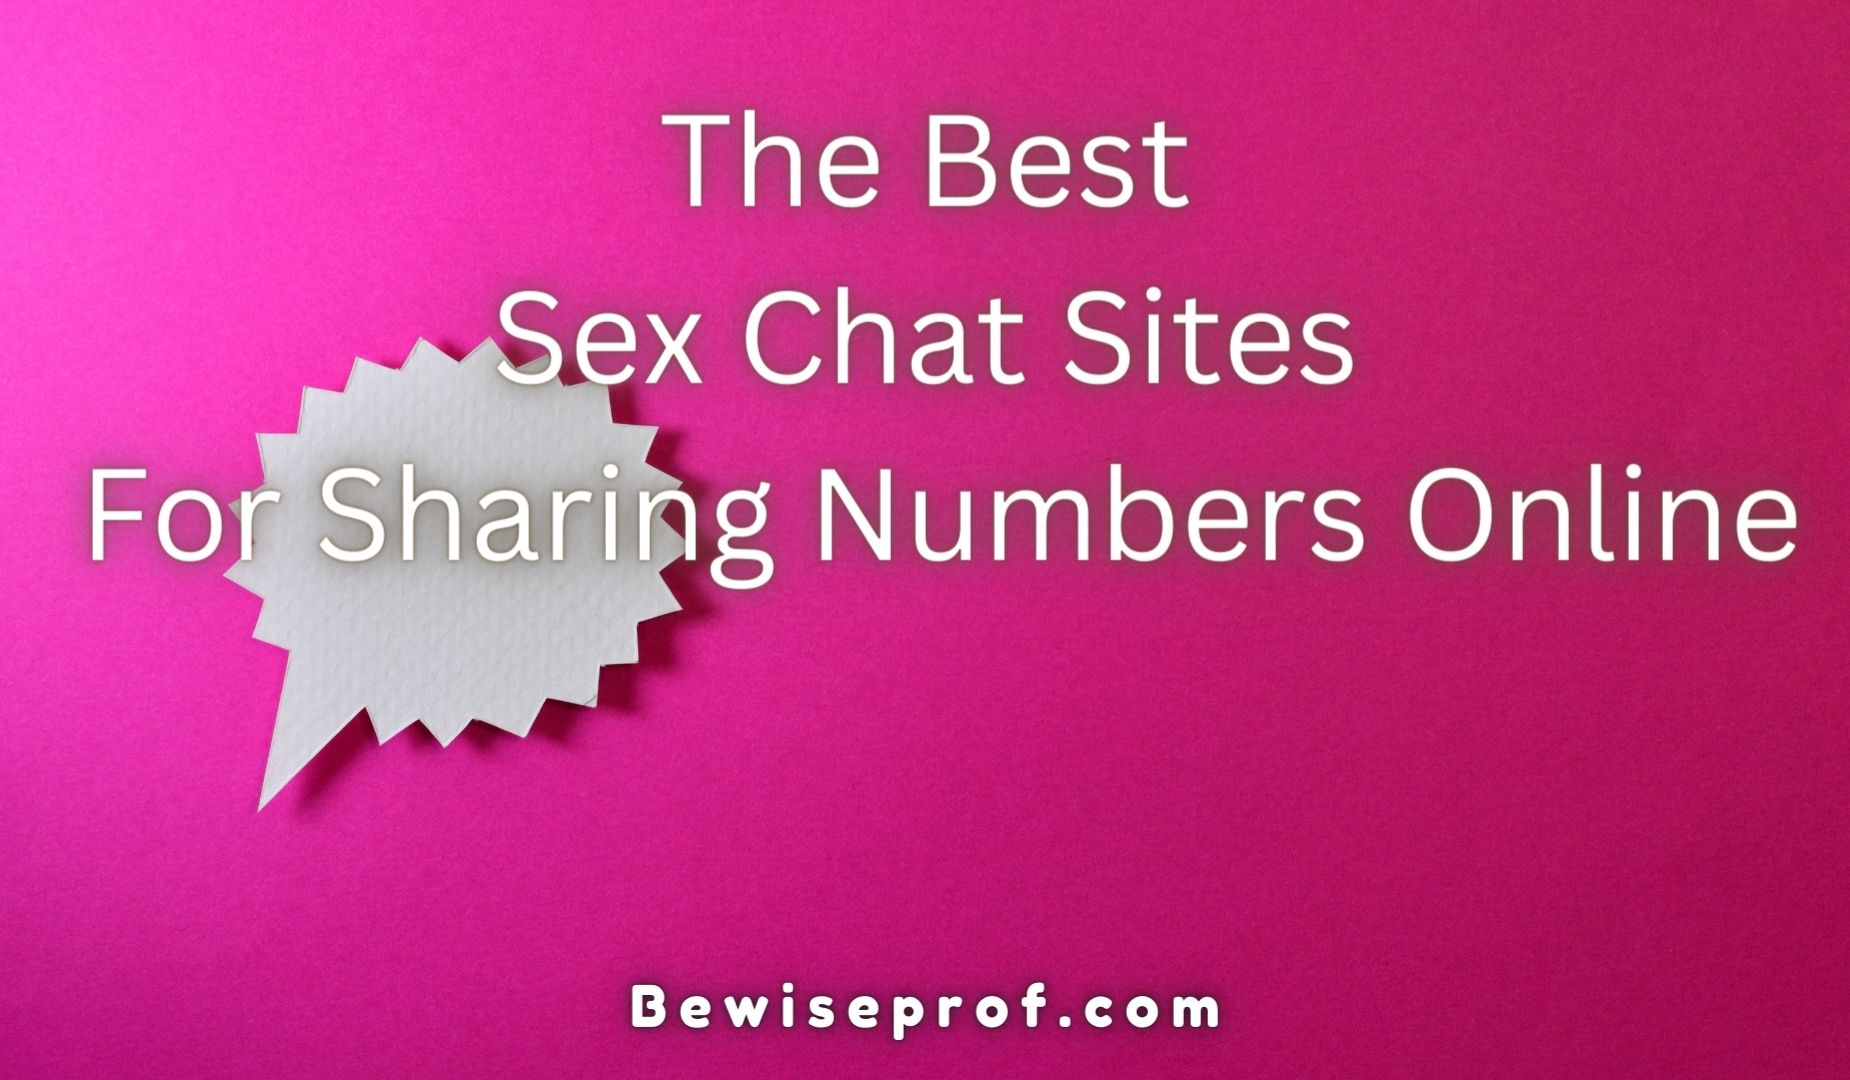 The Best Sex Chat Sites For Sharing Numbers Online